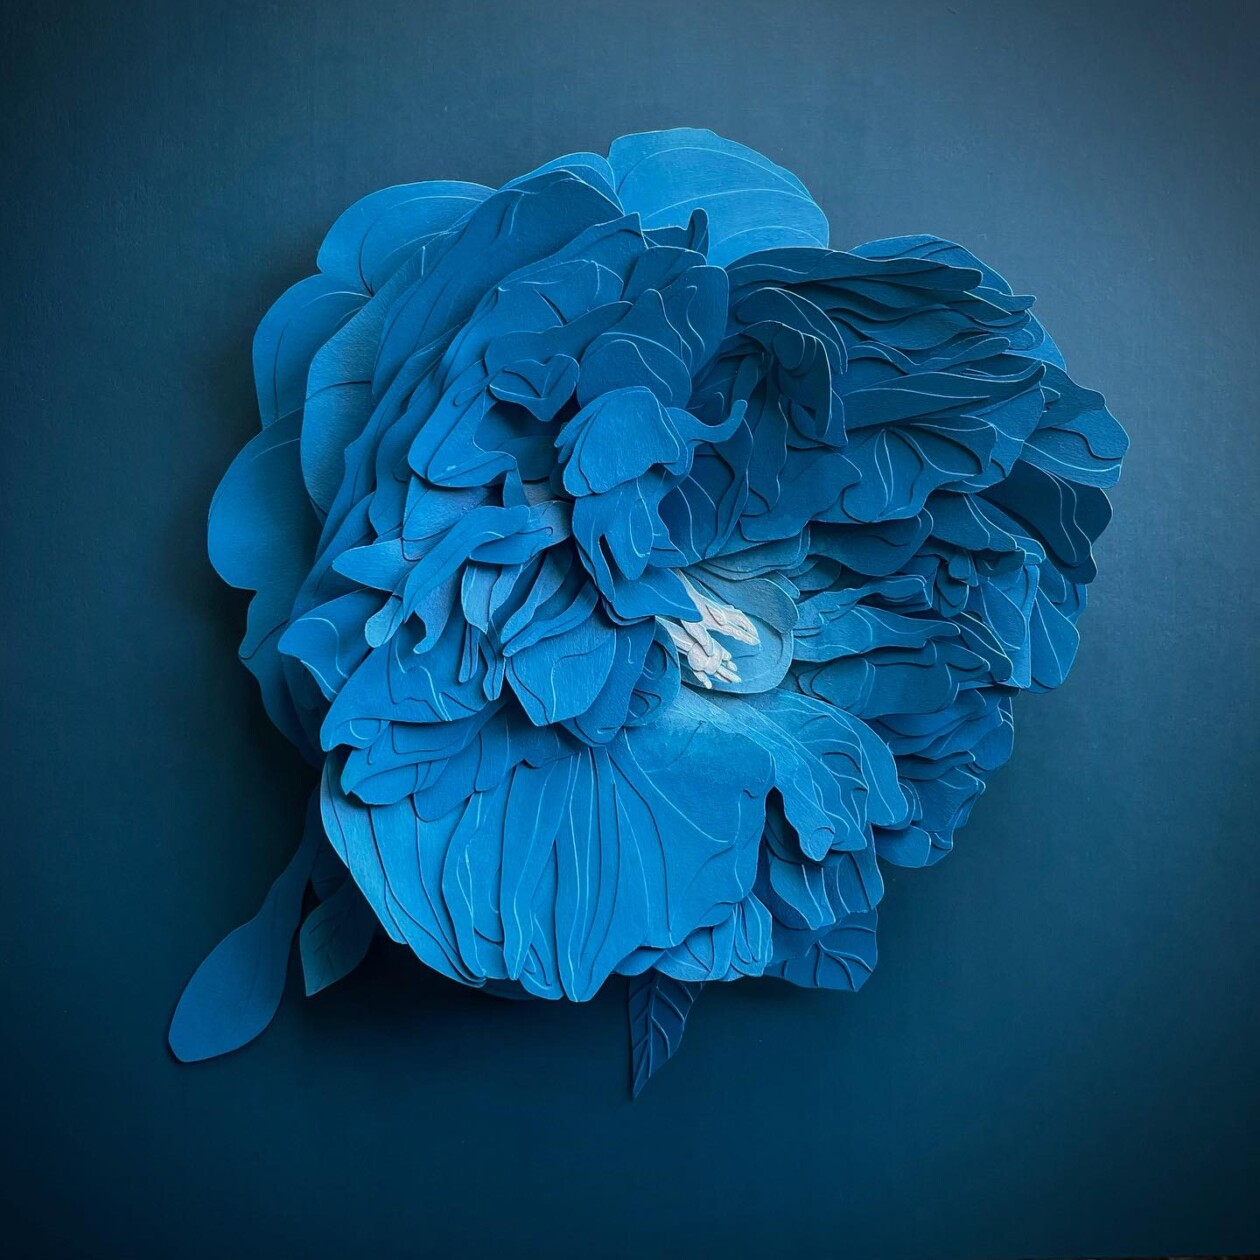 Gorgeously Intricate Floral Paper Cutting Sculptures By Joey Bates (16)